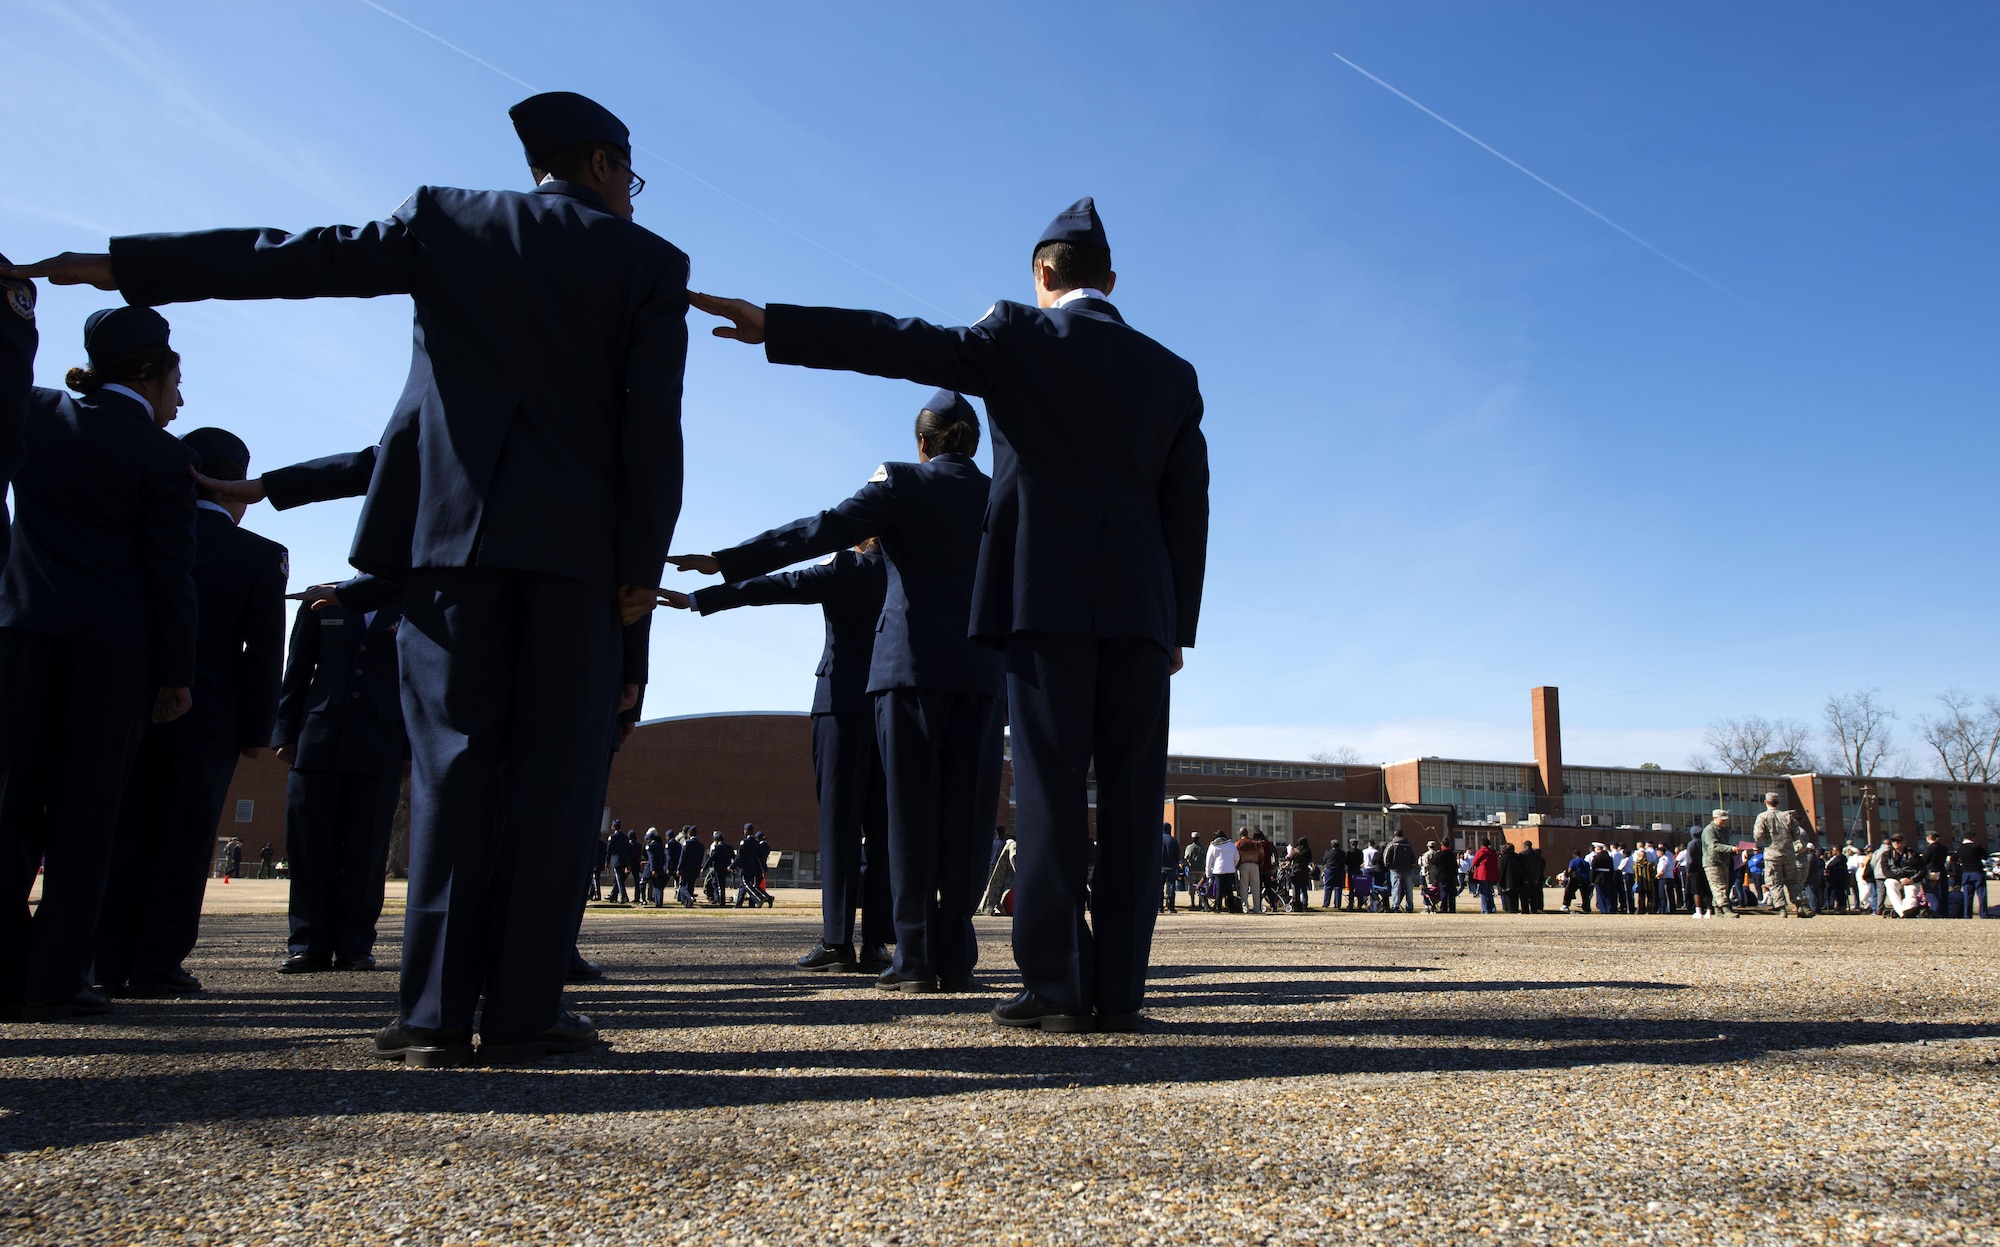 Air Force Junior ROTC cadets from Huntsville, Alabama, perform drill commands during the Larry Jones Invitational Drill Meet hosted by Robert E. Lee High School, Montgomery, Alabama, Jan. 31, 2015. Nineteen Junior ROTC units competed during the drill meet for the chance to win the Commander’s Trophy. (U.S. Air Force photo by Airman 1st Class Alexa Culbert/Cleared)